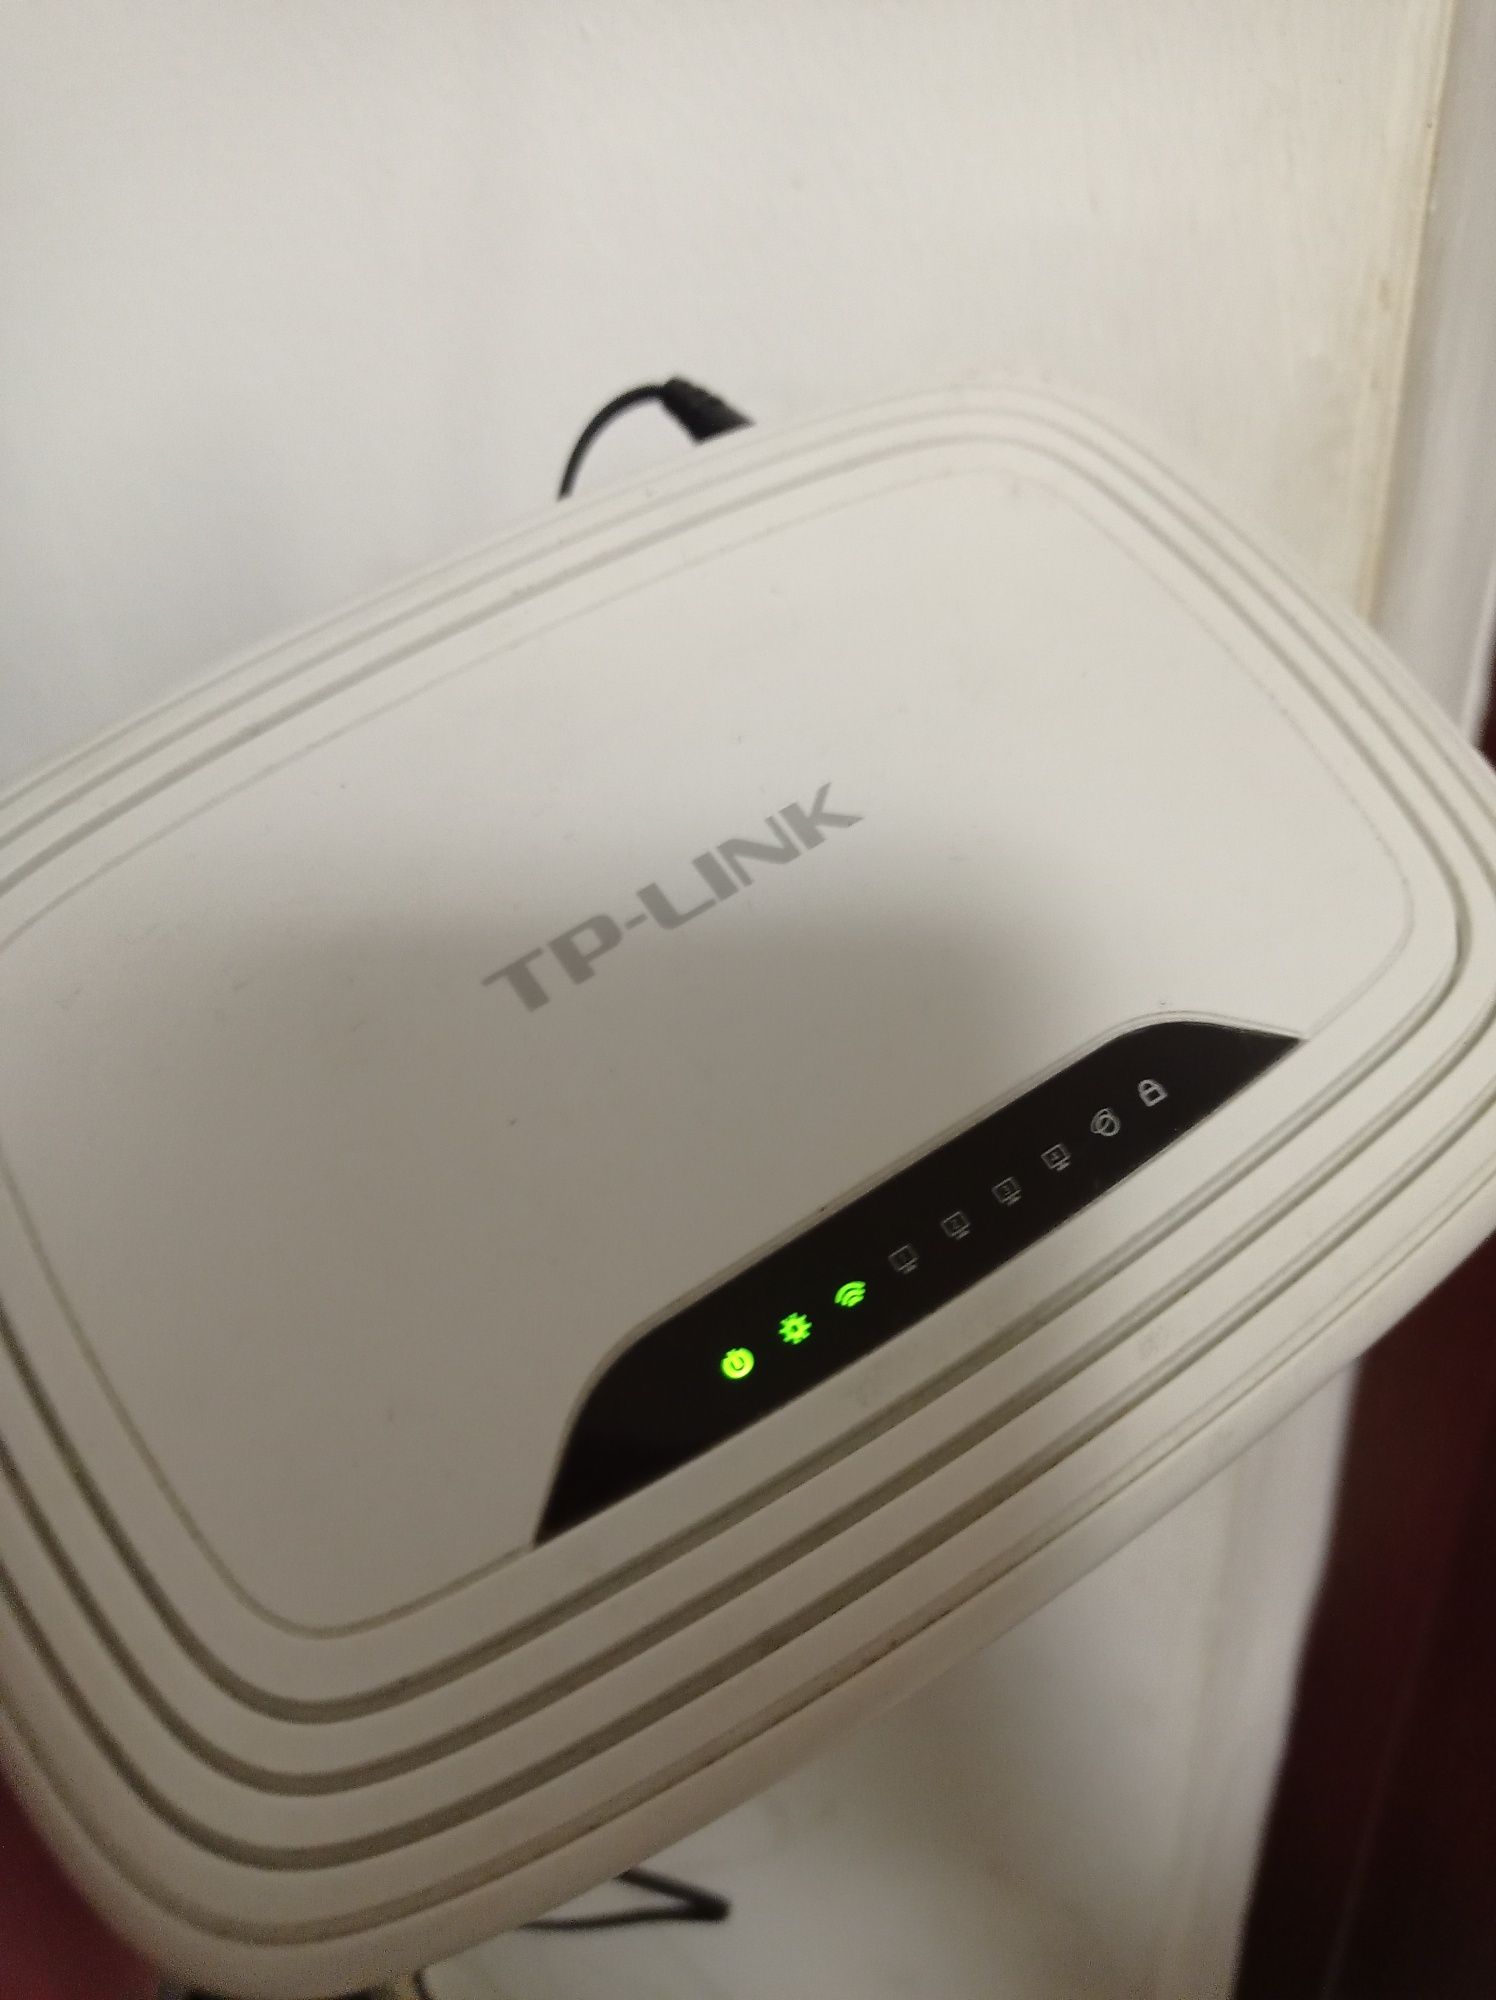 Router роутер маршрутизатор  TP-LINK  TL-WR740N